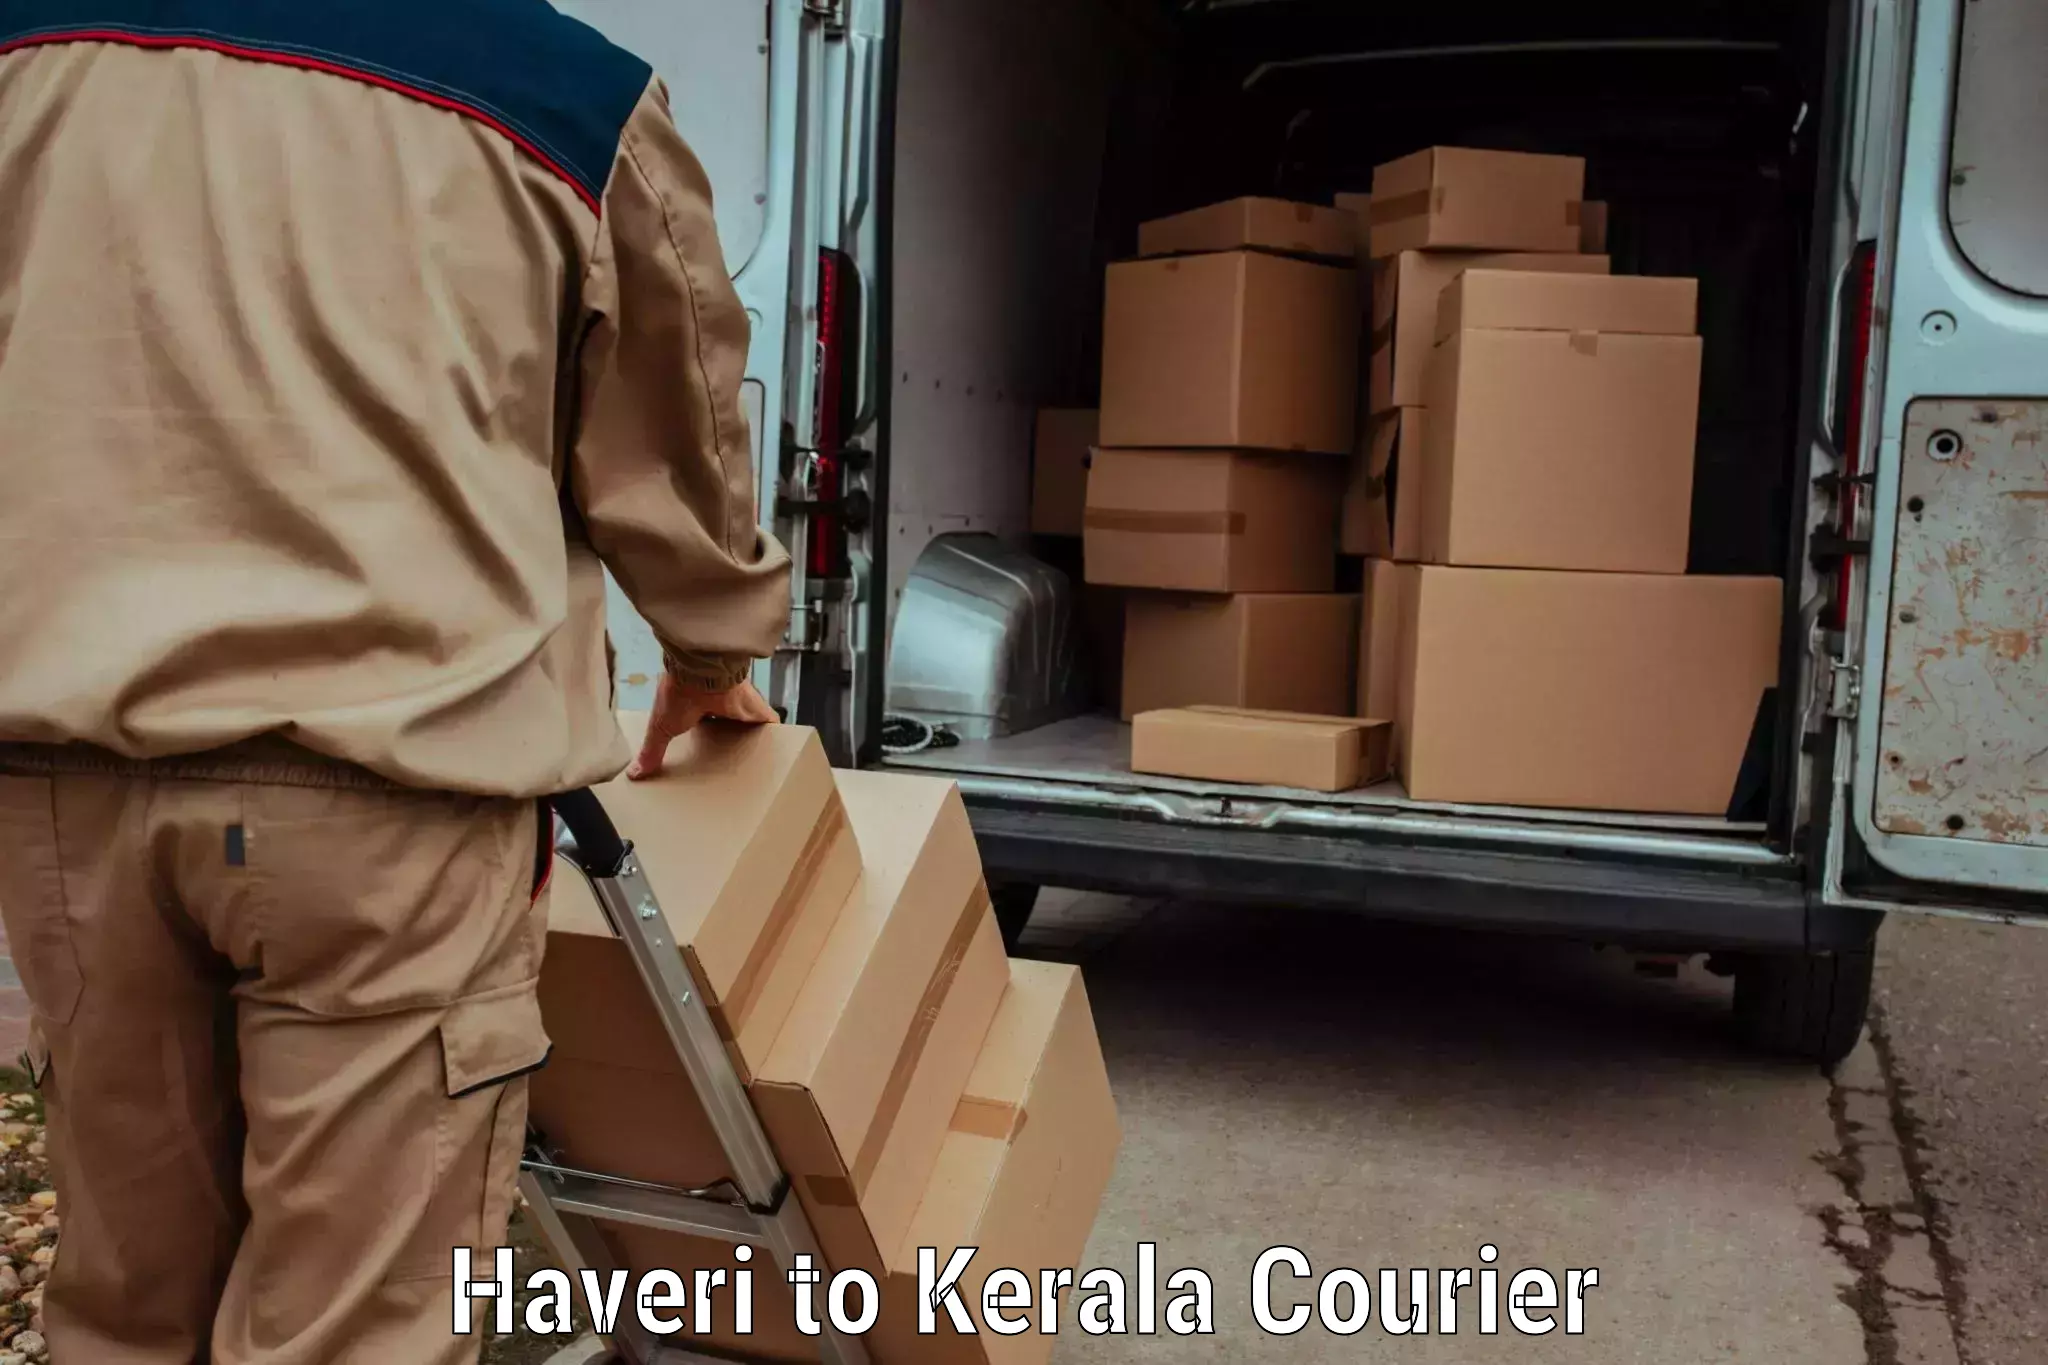 24/7 shipping services Haveri to Ernakulam